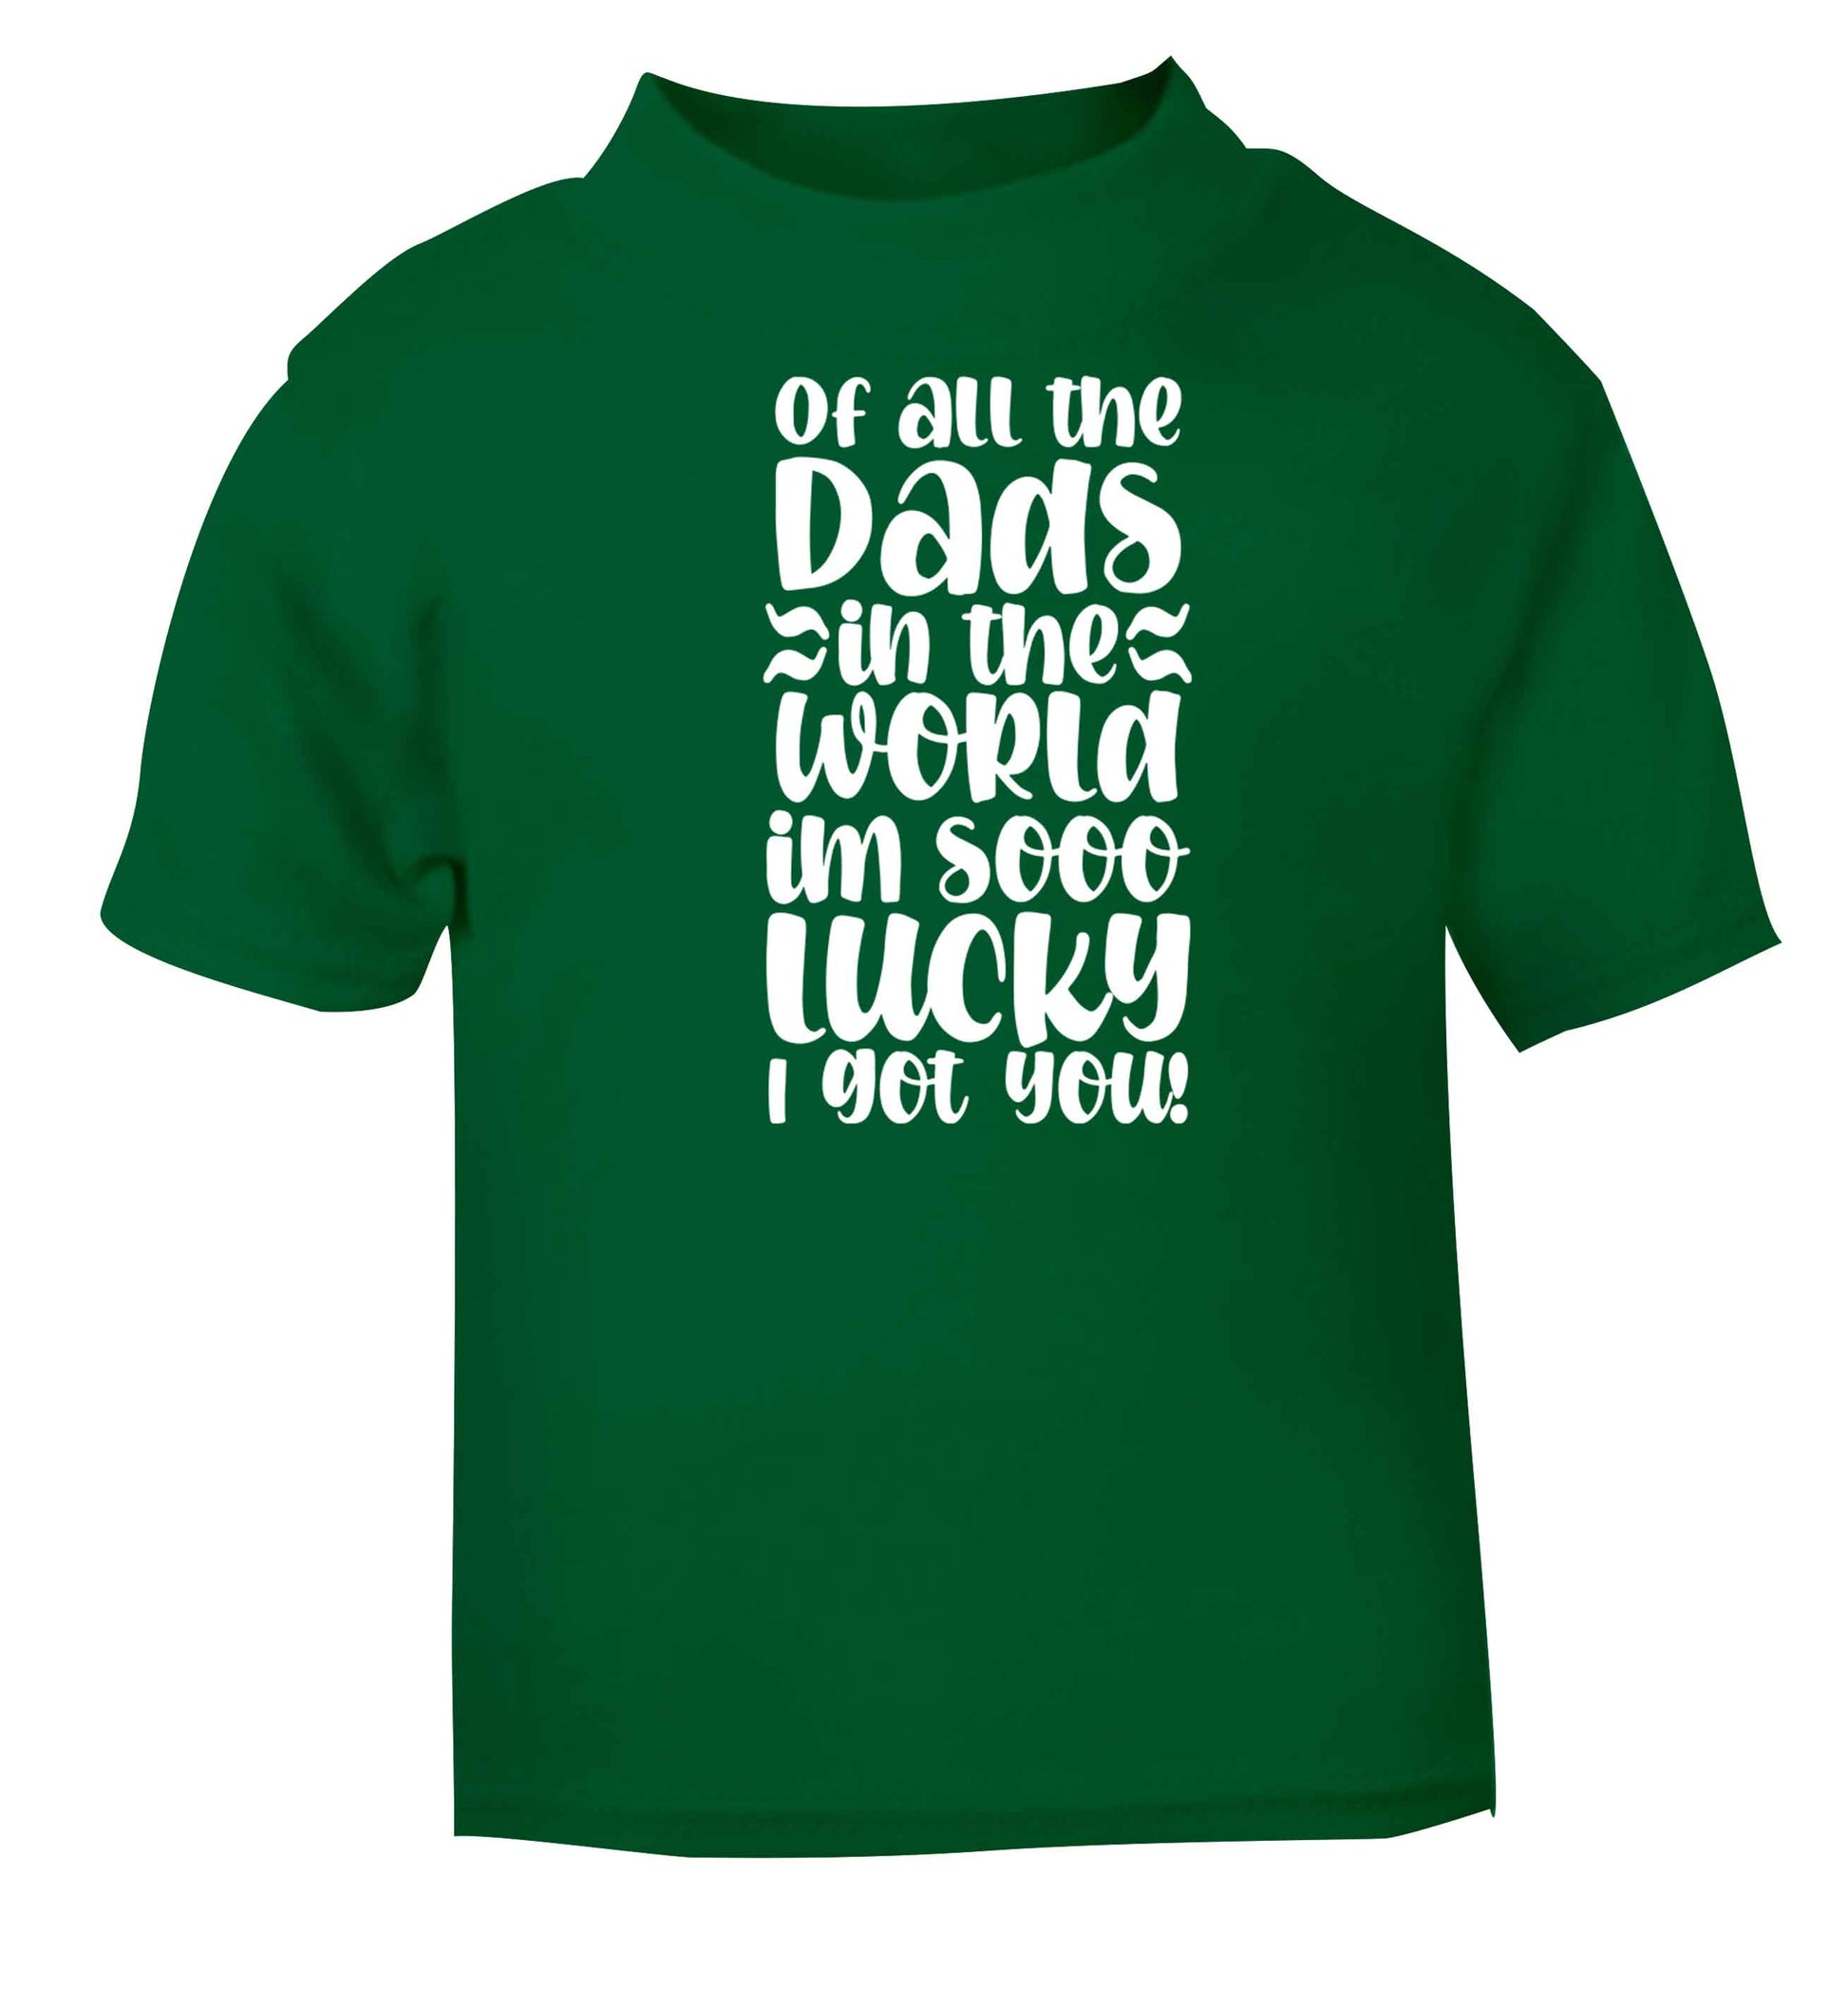 I'm as lucky as can be the worlds greatest dad belongs to me! green baby toddler Tshirt 2 Years